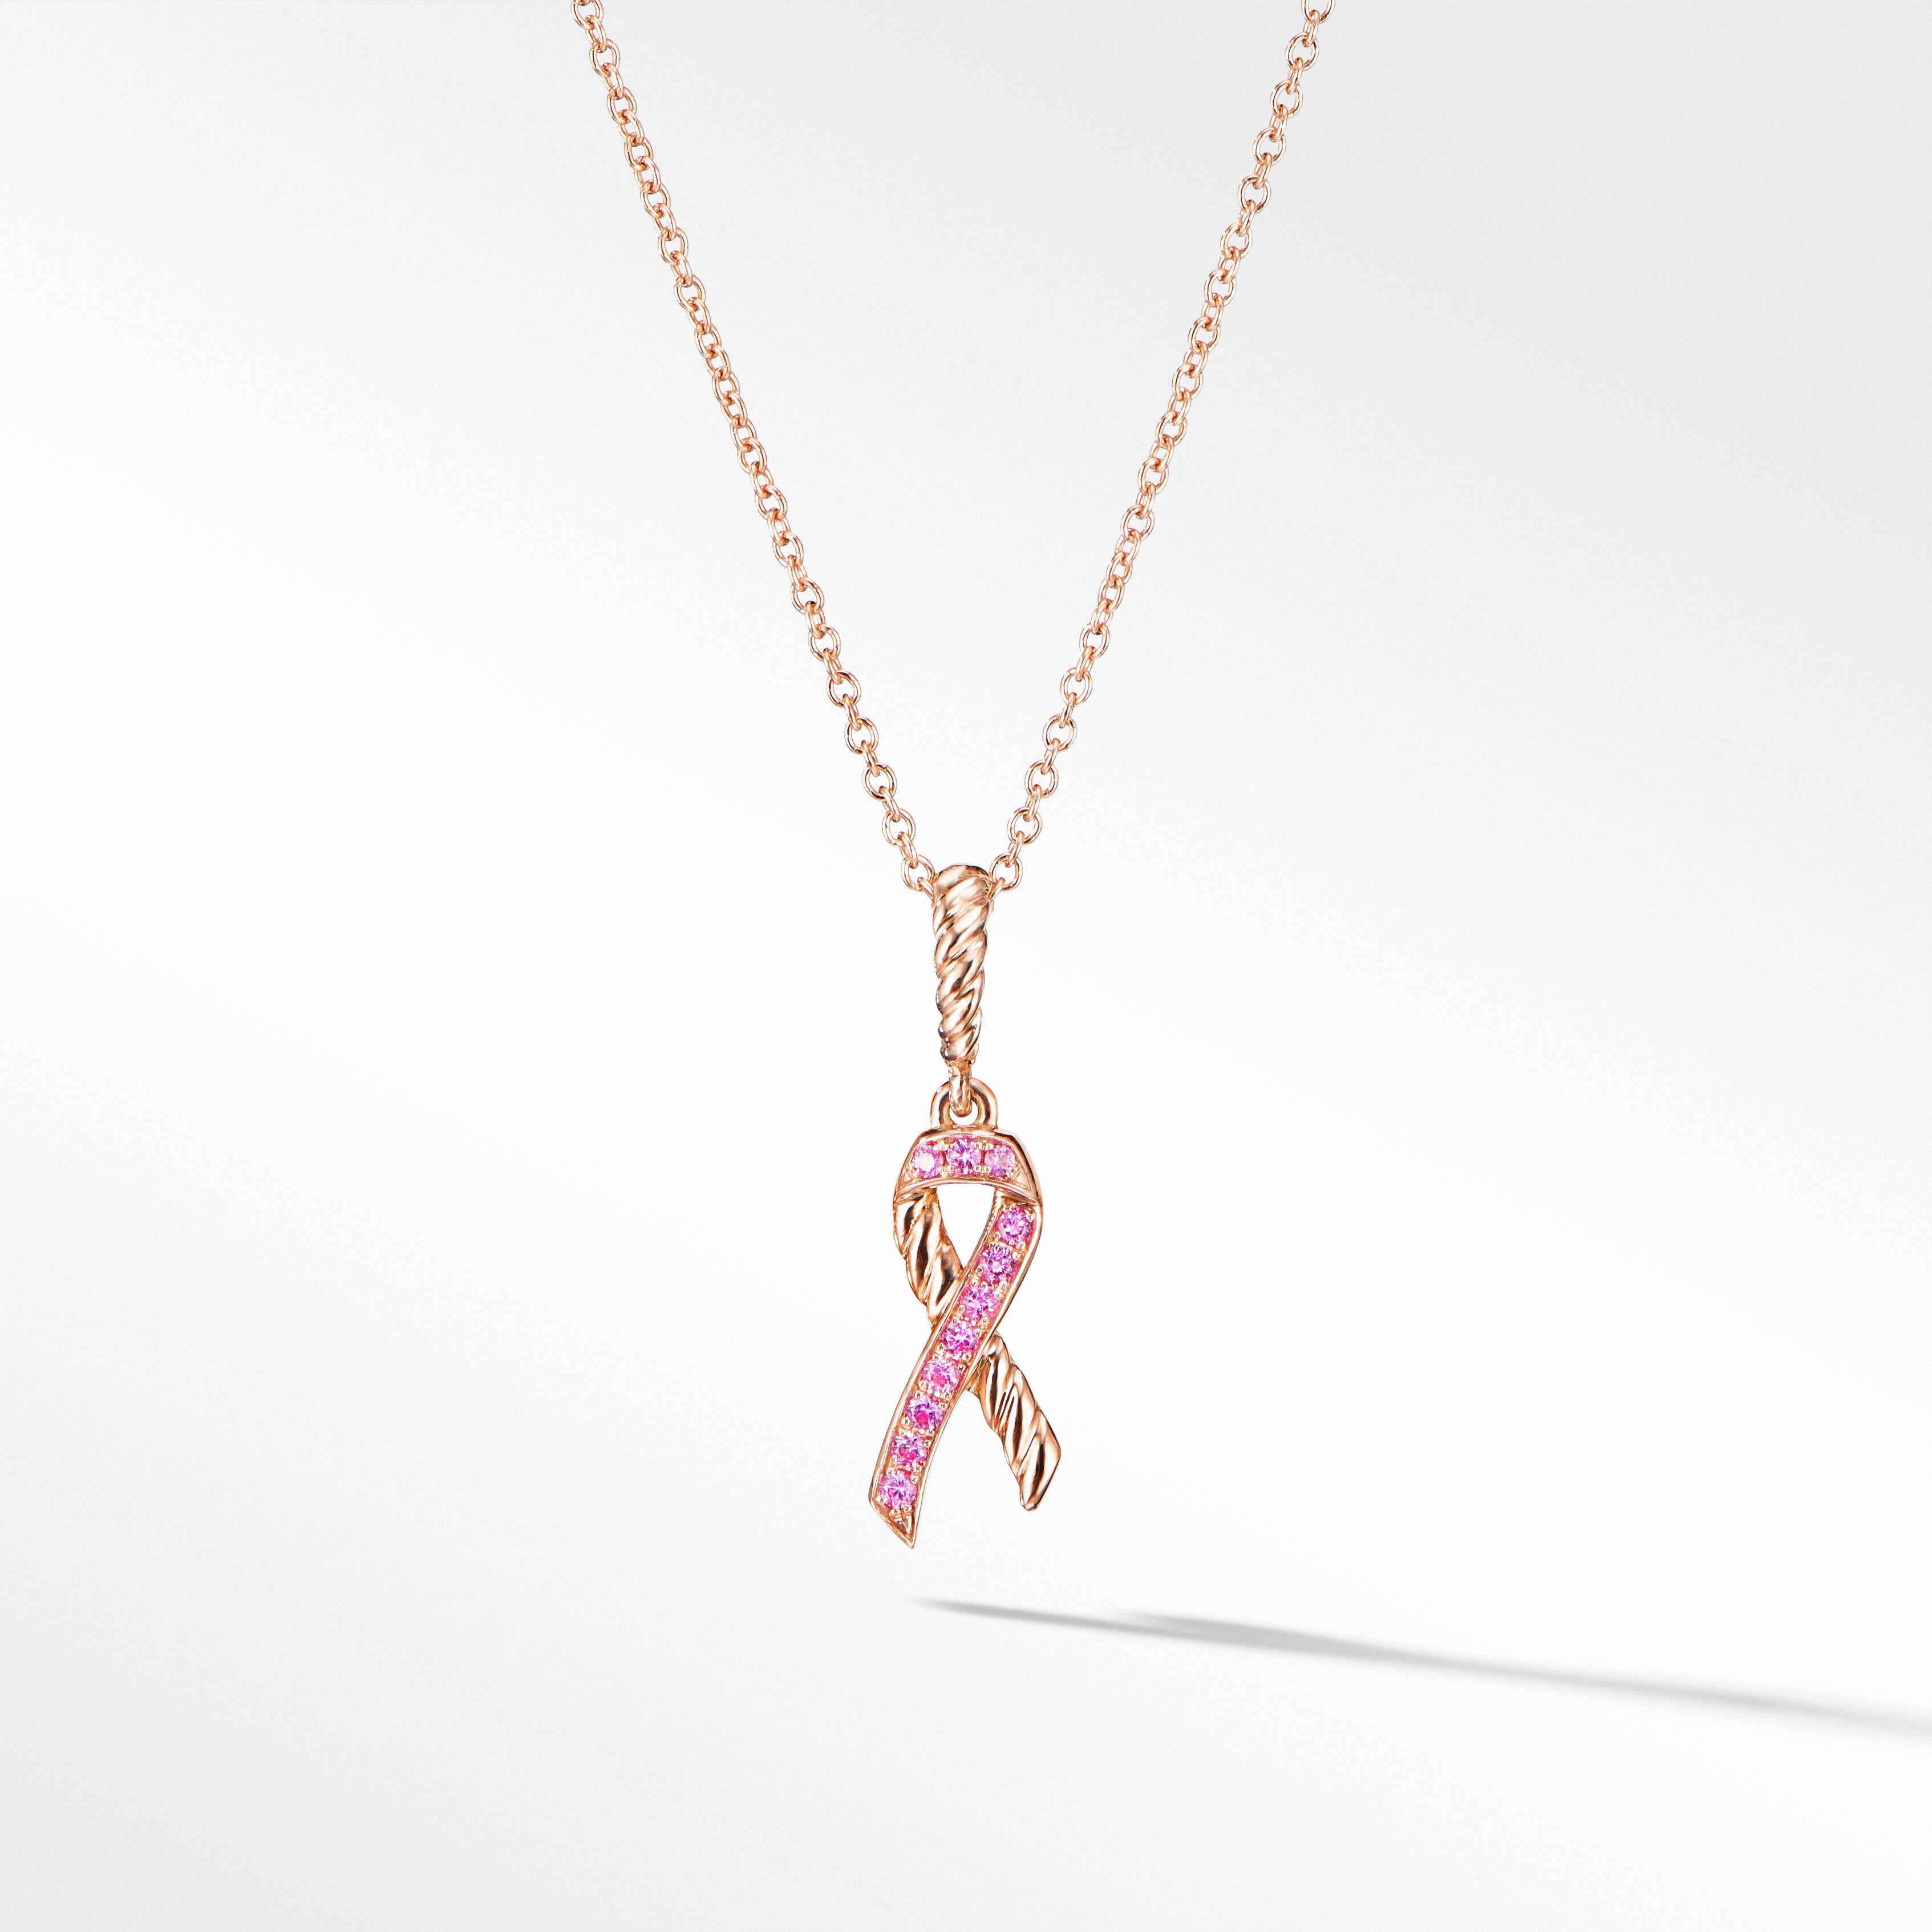 Cable Collectibles® Ribbon Necklace in 18K Rose Gold with Pavé Pink Sapphires